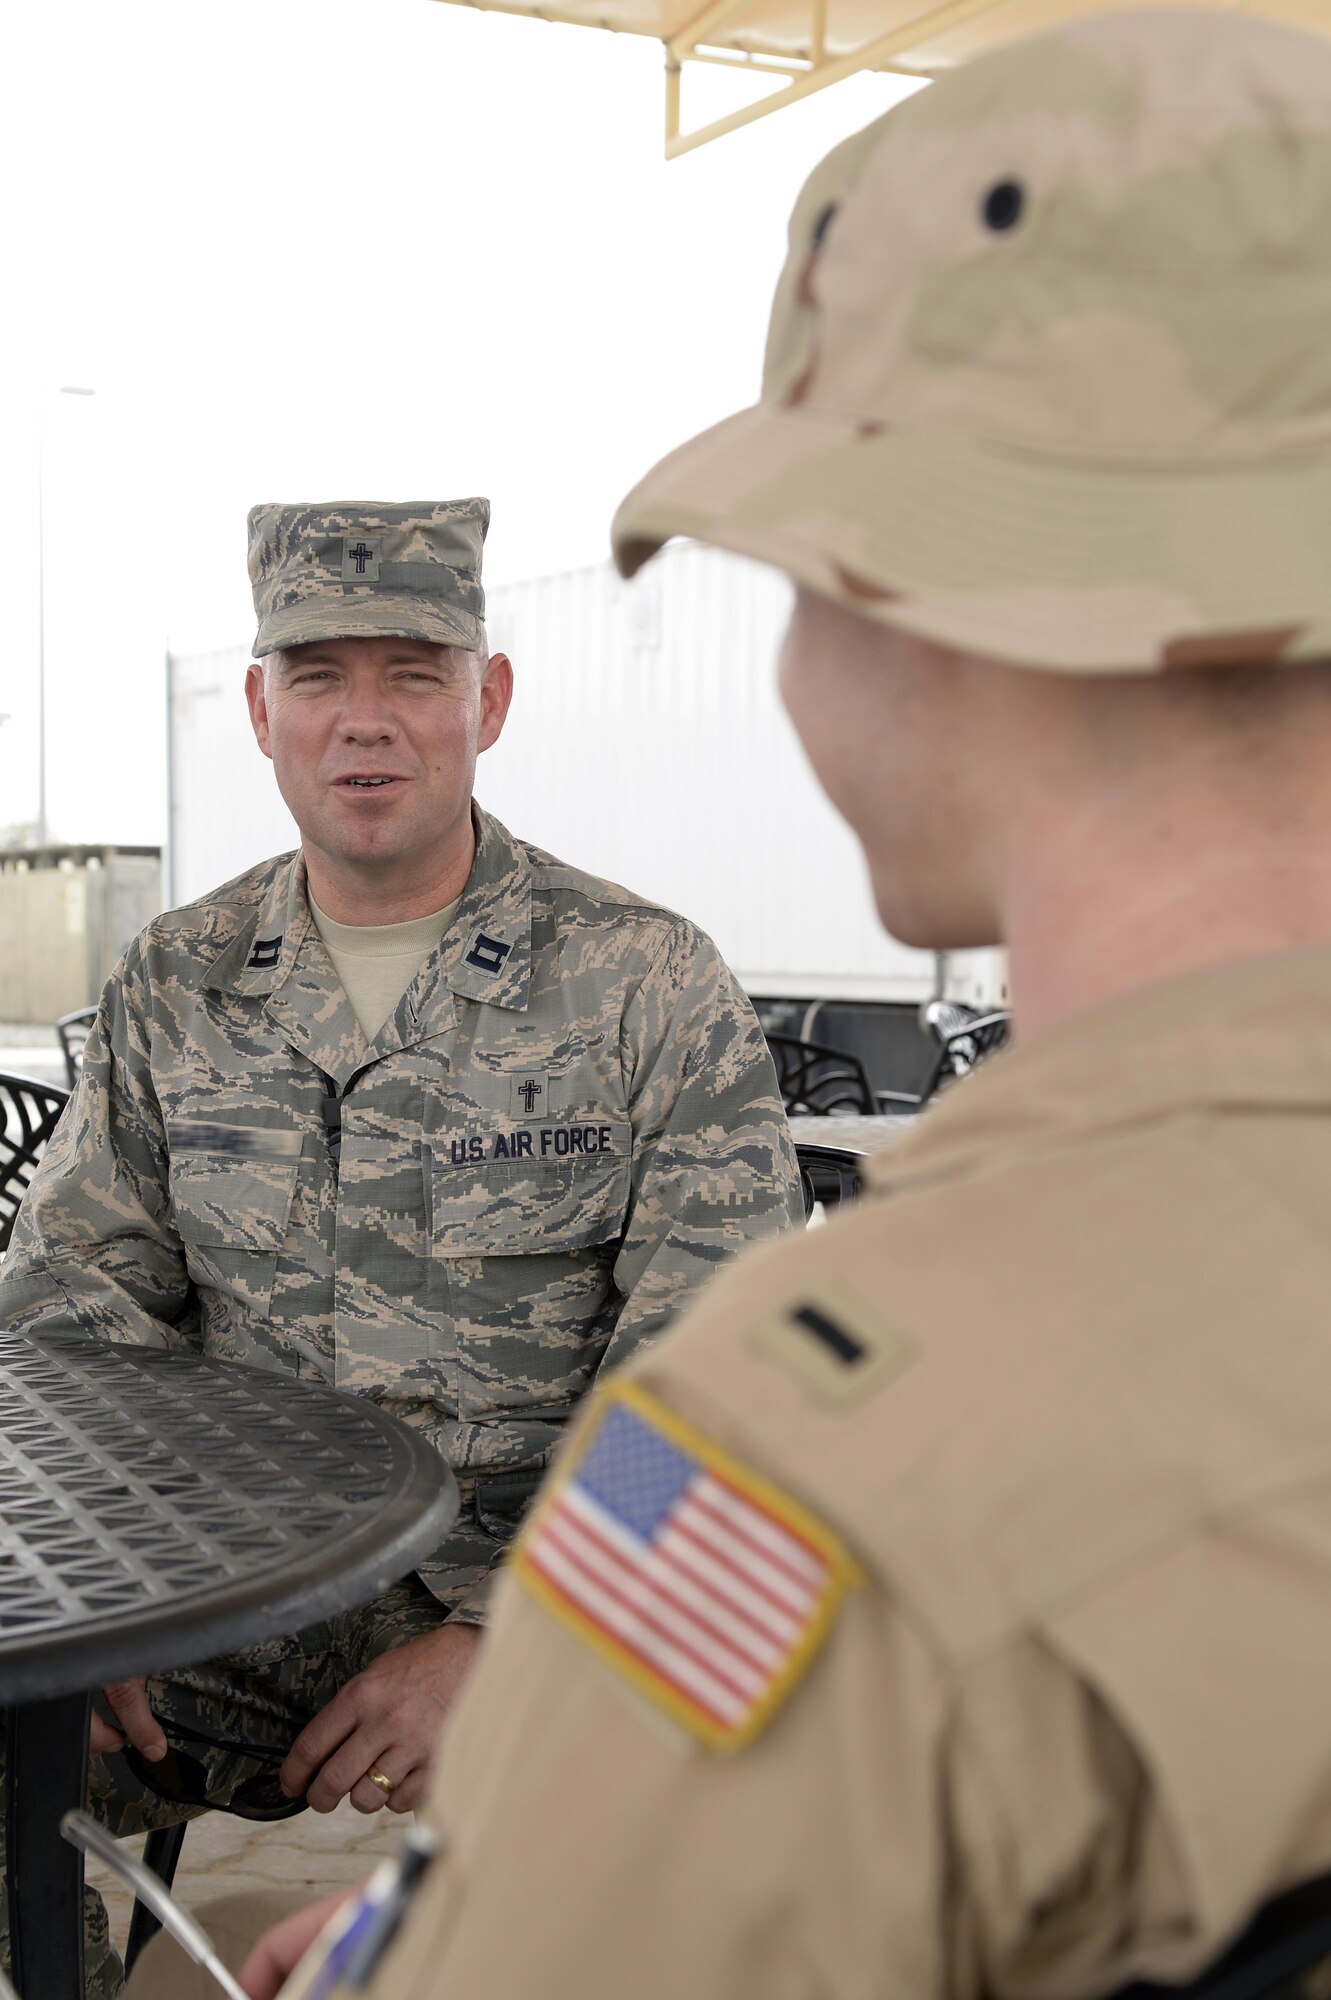 Chaplain Michael, Seven Sands Chapel, talks with an Airman at an undisclosed location in Southwest Asia Mar. 11, 2015. Unit ministries are conducted with intentional focus on the Airman through various briefings, workplace walkthroughs as well as unit activities such as awards ceremonies, barbeques and unit physical training. Michael is currently deployed from Offutt Air Force Base, Neb., and is a native of Yuma, Ariz. (U.S. Air Force photo/Tech. Sgt. Marie Brown)